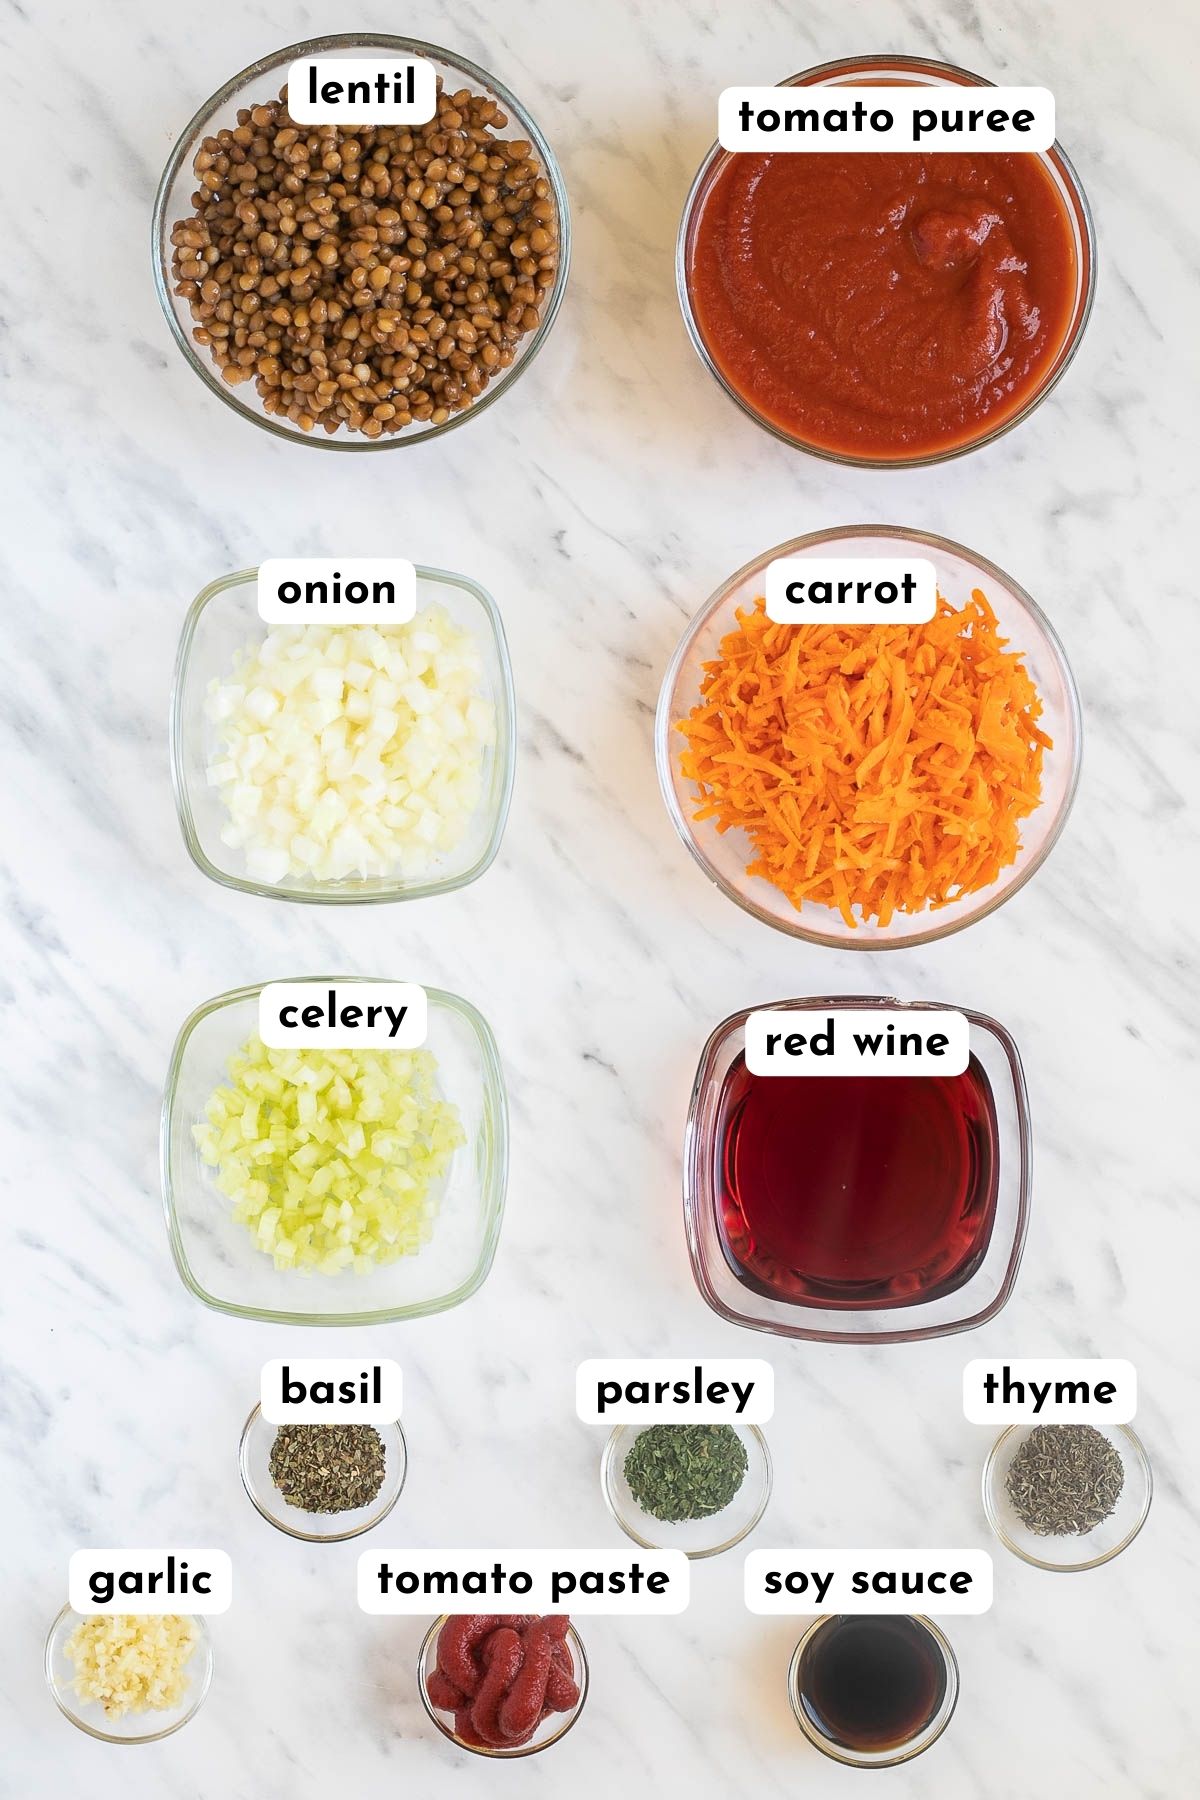 The ingredients of lentil bolognese in small glass bowls like brown lentils, tomato sauce, chopped onions, carrot, celery, red wine and several small bowls of spices.